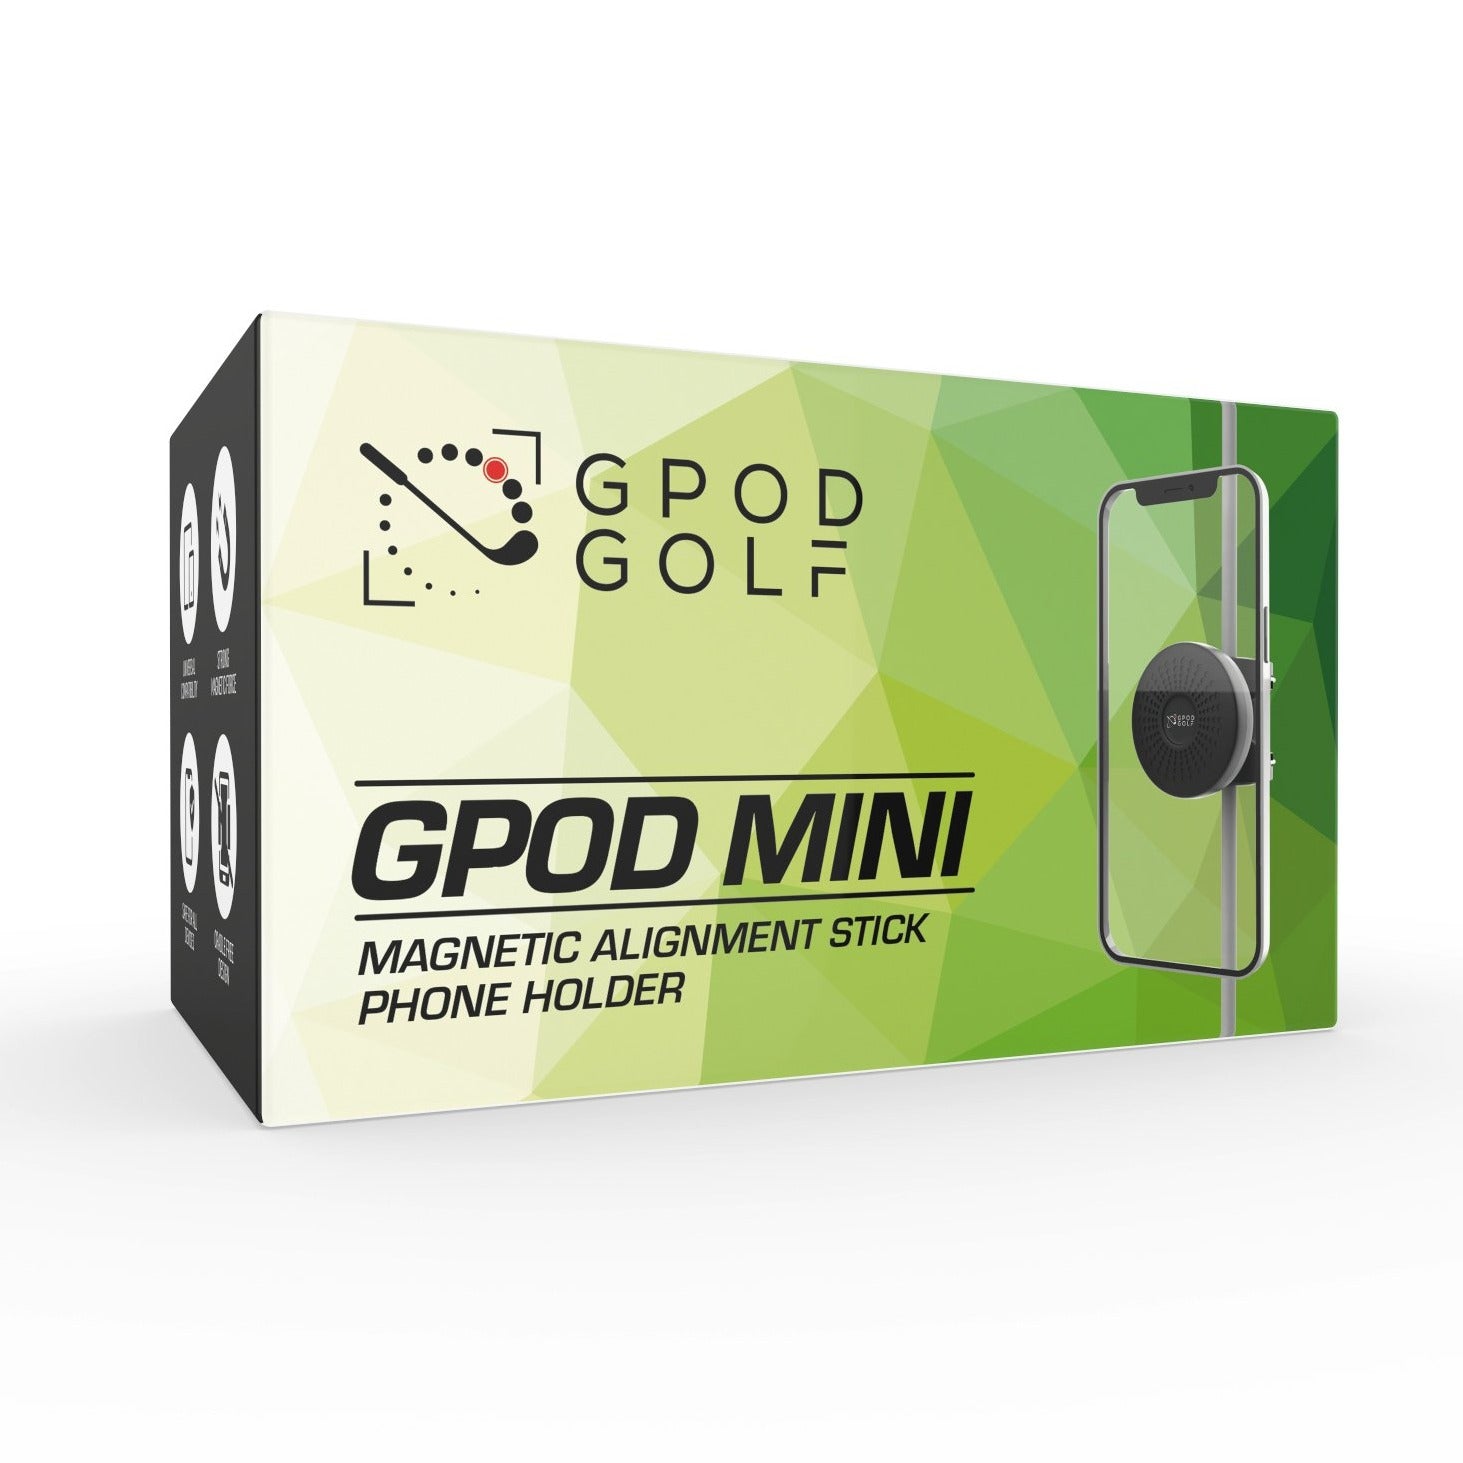 GPOD MINI Magnetic alignment stick phone holder packaging box. Clamp the magnetic mount to an alignment stick and stick your phone to it. 